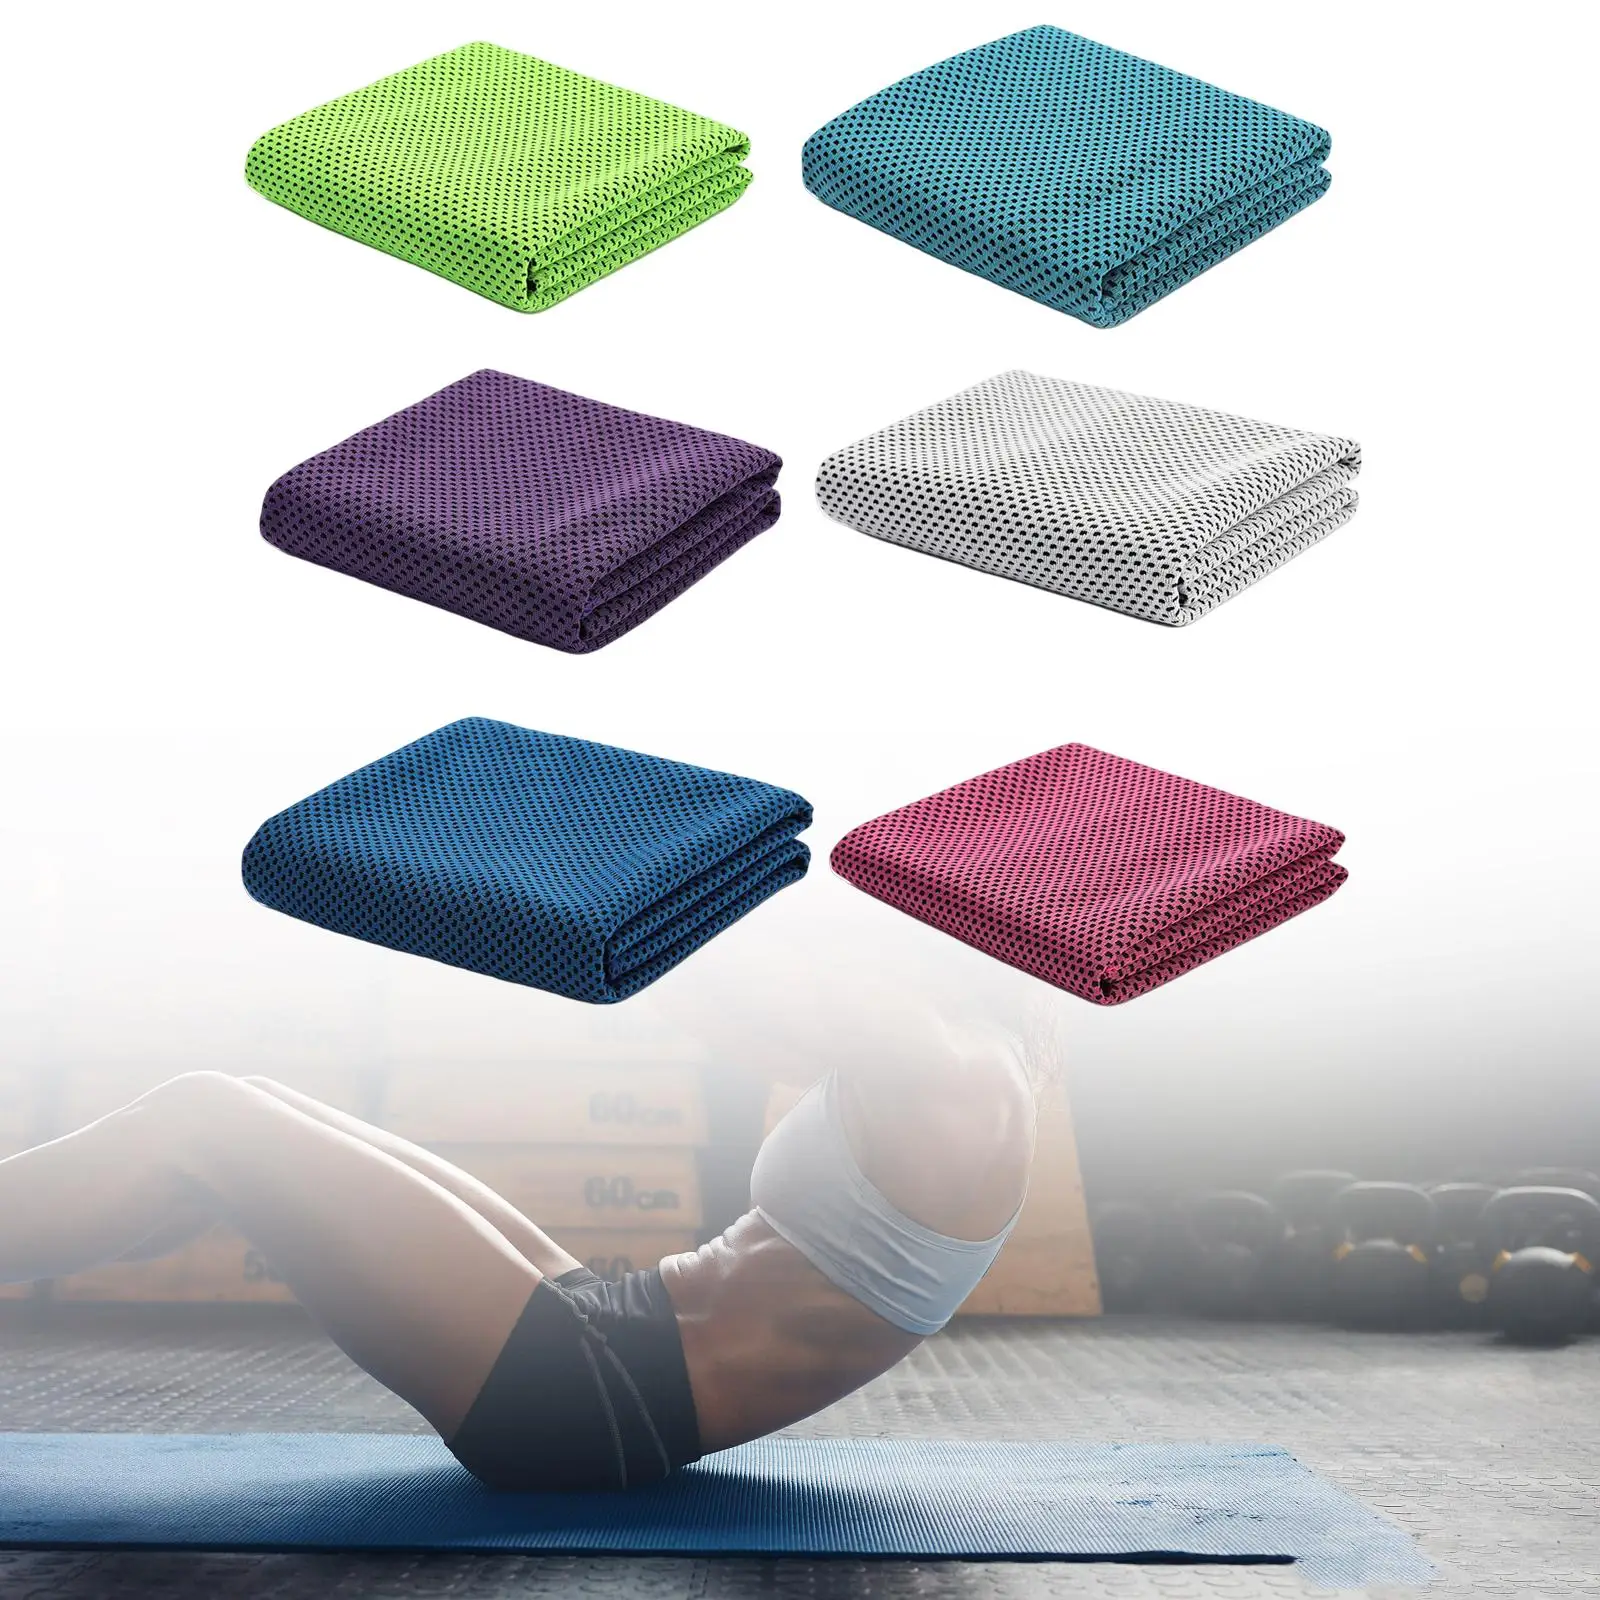 6 Pieces Cooling Towel Neck Wrap Ice Towel for Fitness Workout Outdoor